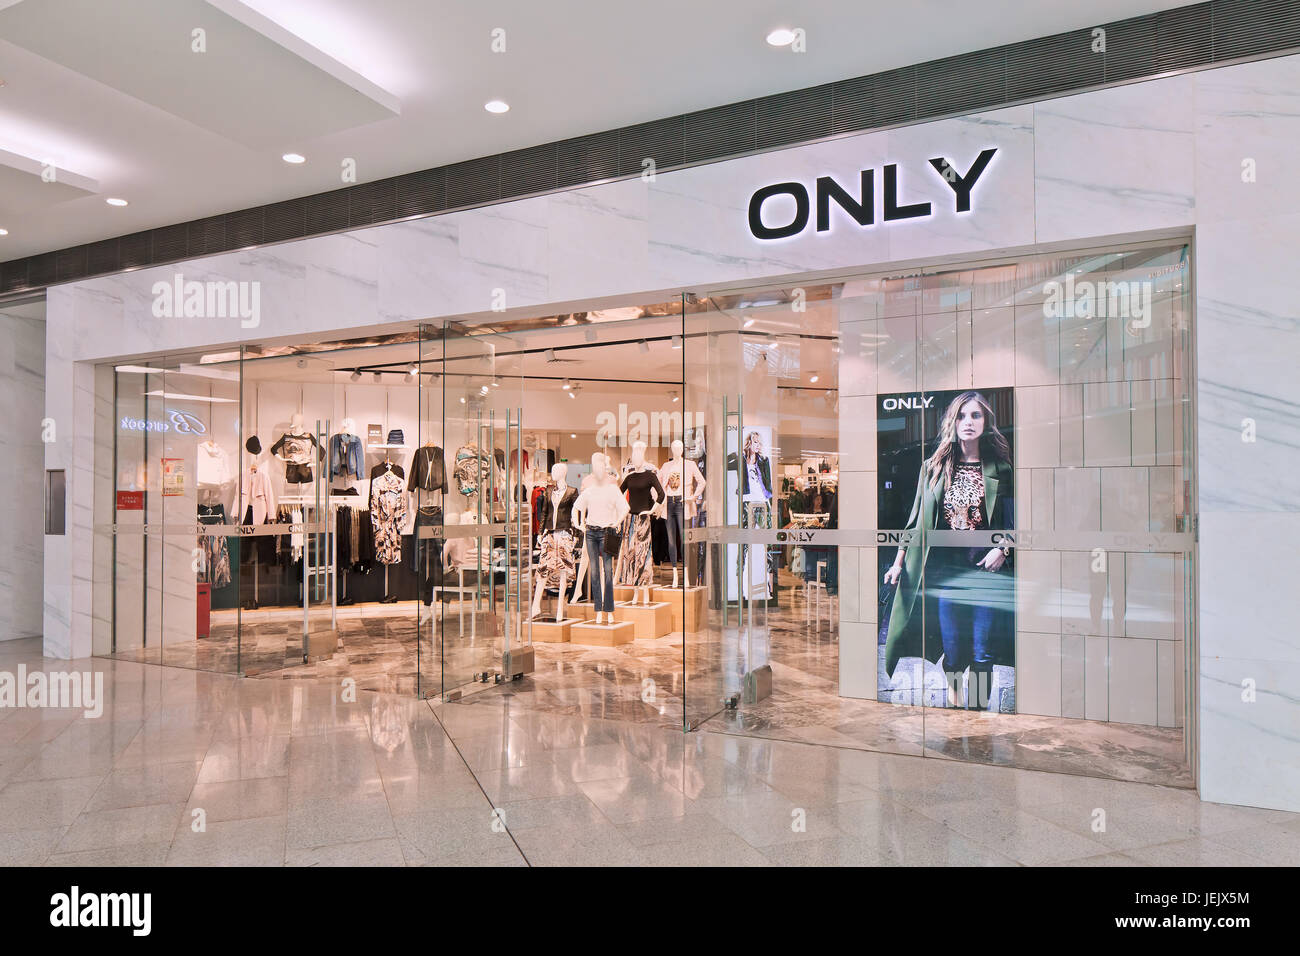 BEIJING-AUG. 21, 2015. Only fashion clothing outlet. Danish Stock Photo -  Alamy